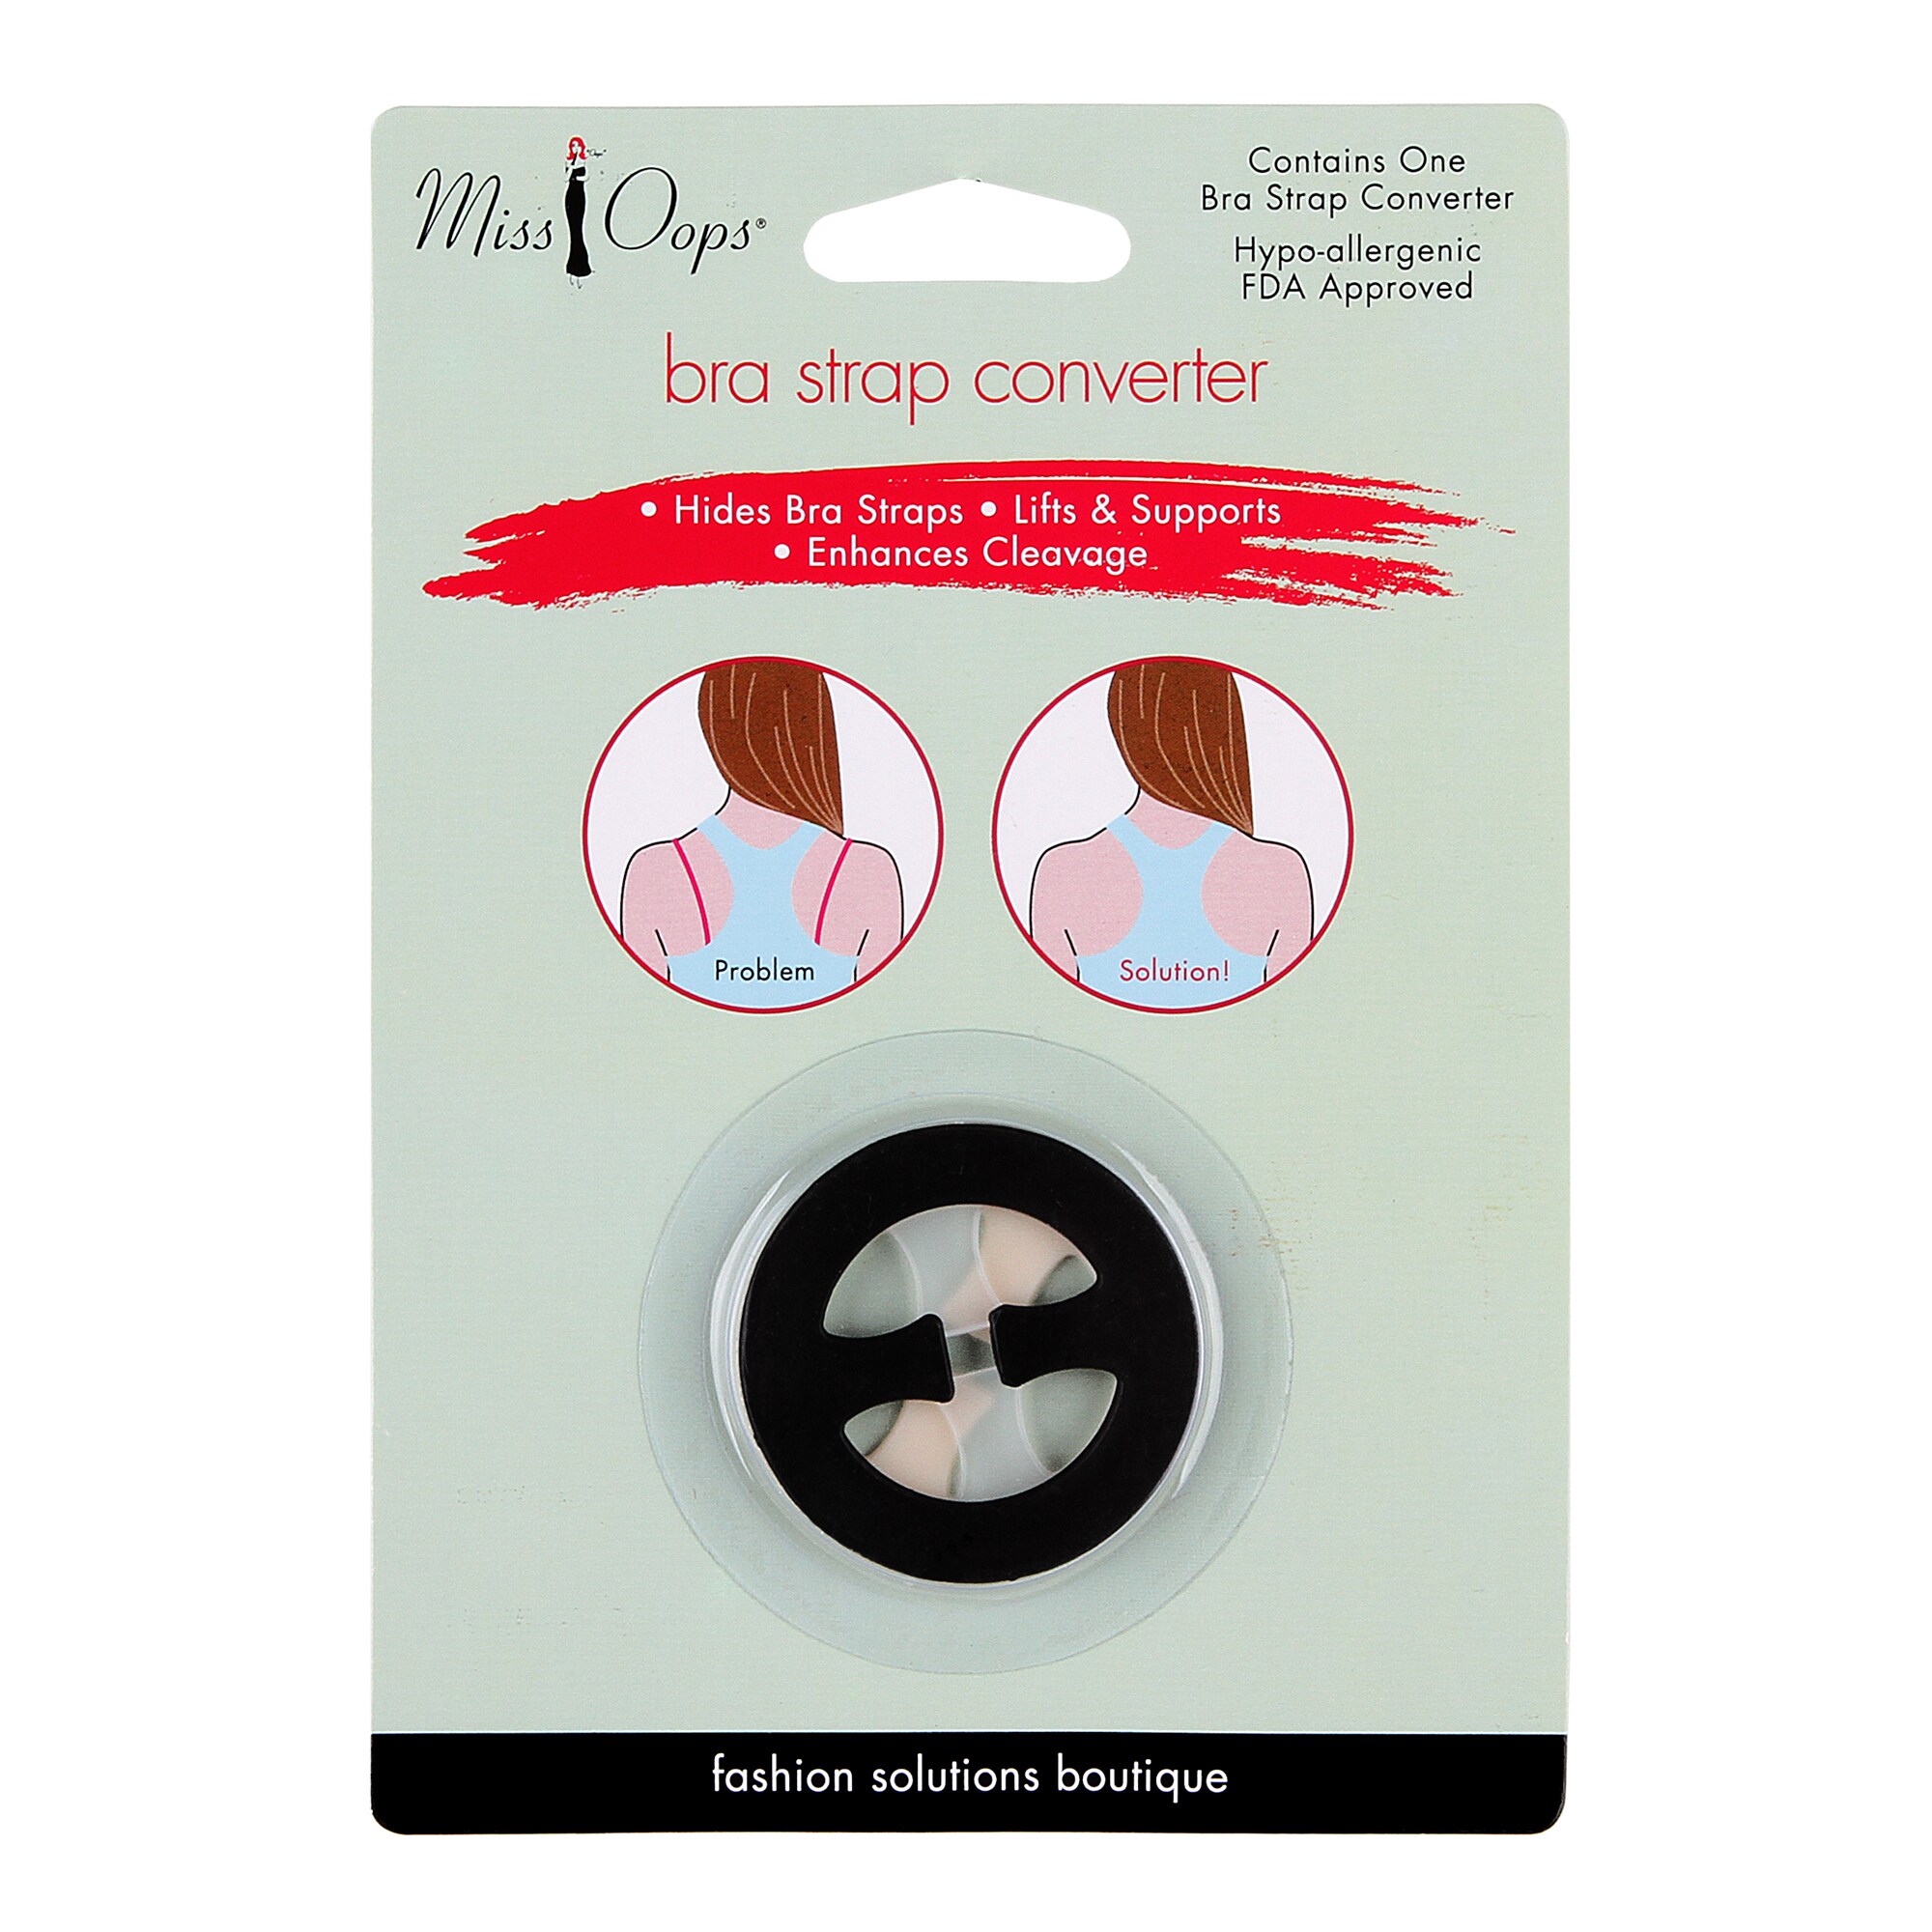 Miss Oops Bra Converter (pack Of 6) (1.69 inches long x 1.69 inches wide x .1 inch high We cannot accept returns on this product.Due to manufacturer packaging changes, product packaging may vary from image shown. )